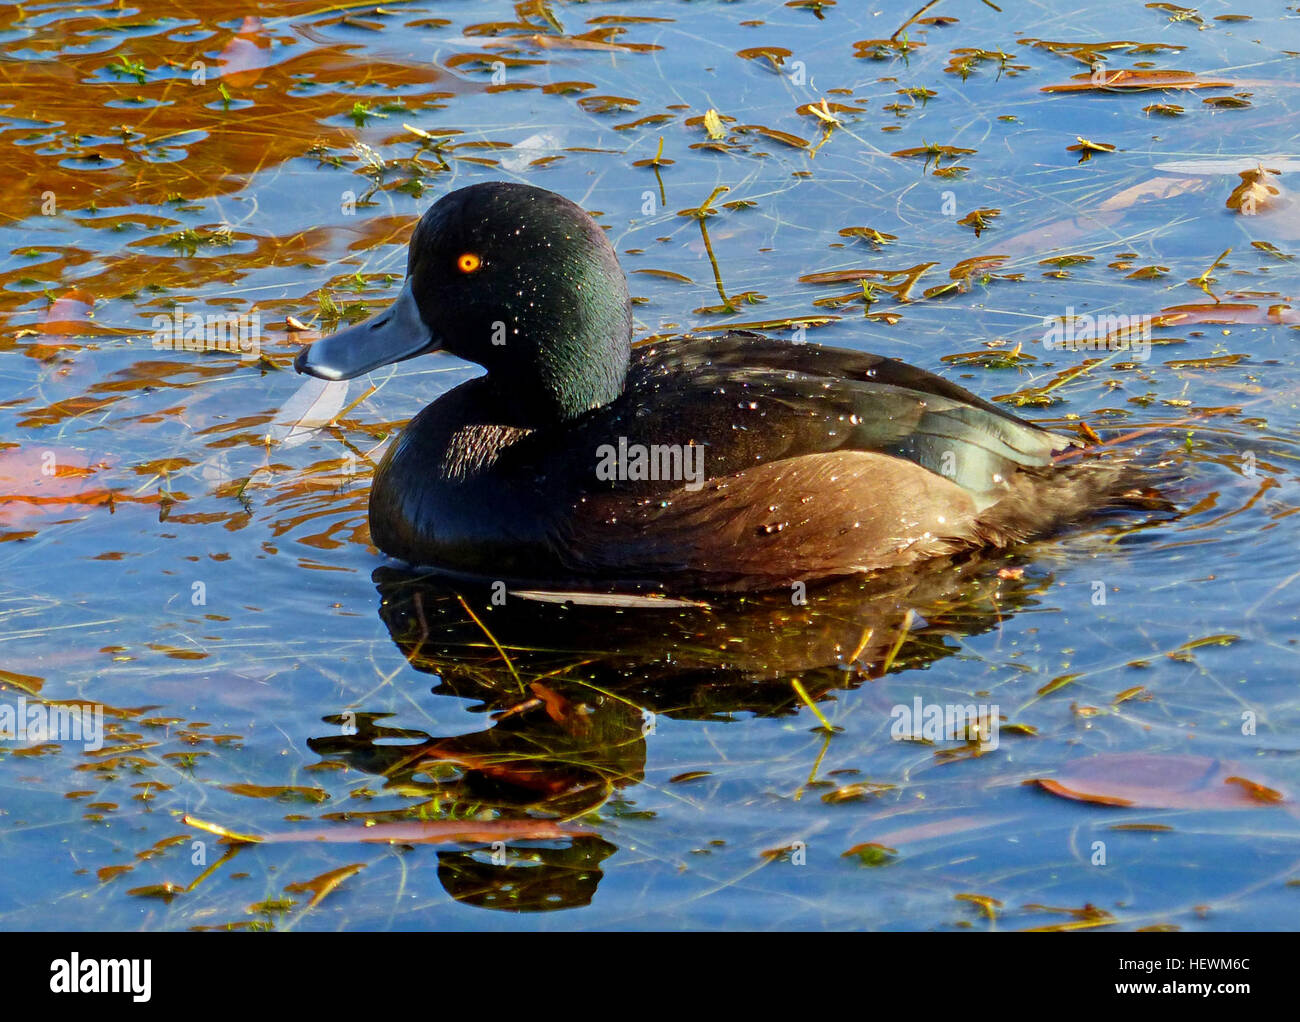 The New Zealand scaup or pāpango is a short, round diving duck. The male is glossy dark brown and black with yellow eyes. The female is dark brown and often has a vertical white band at the base of the bill. They tend to avoid danger by diving rather than by flying. Stock Photo